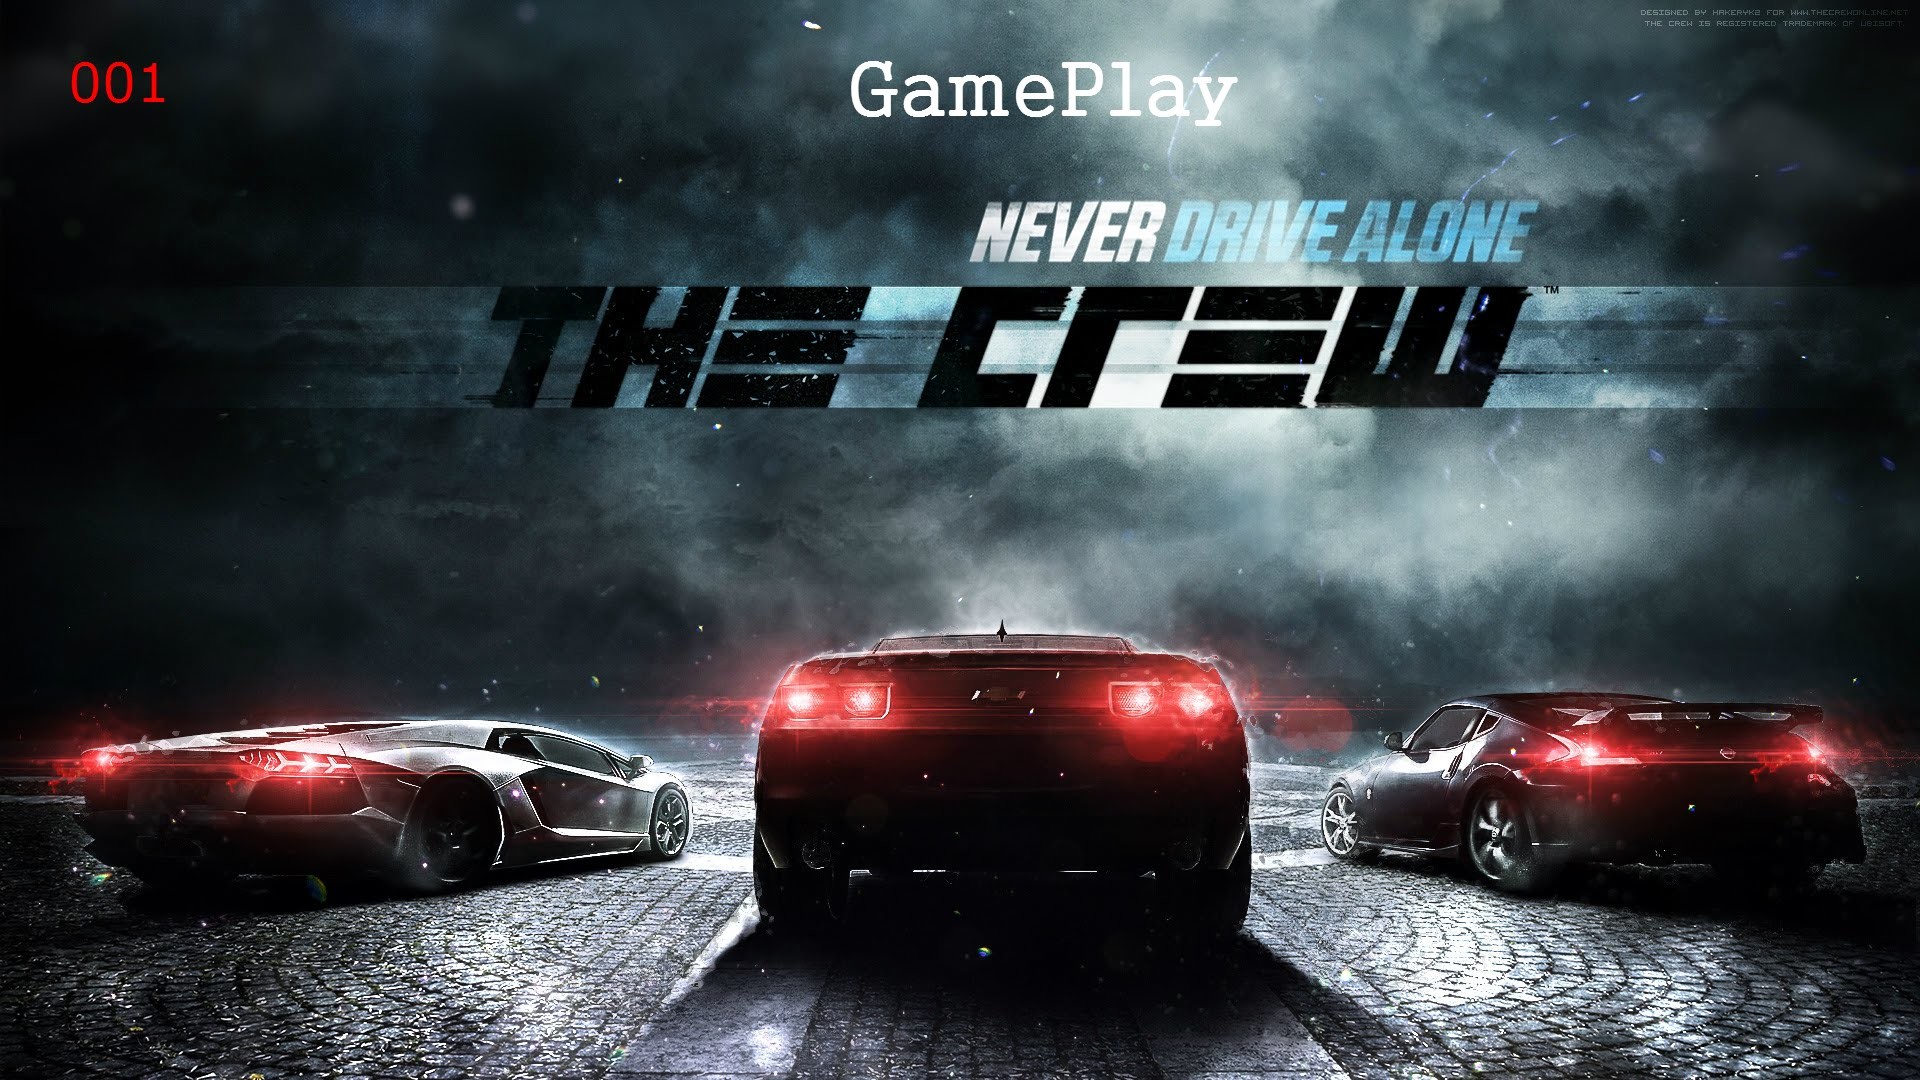 1920x1080 The Crew PC Gameplay #1 MSI 970 Gaming + AMD FX 8350@4.8ghz